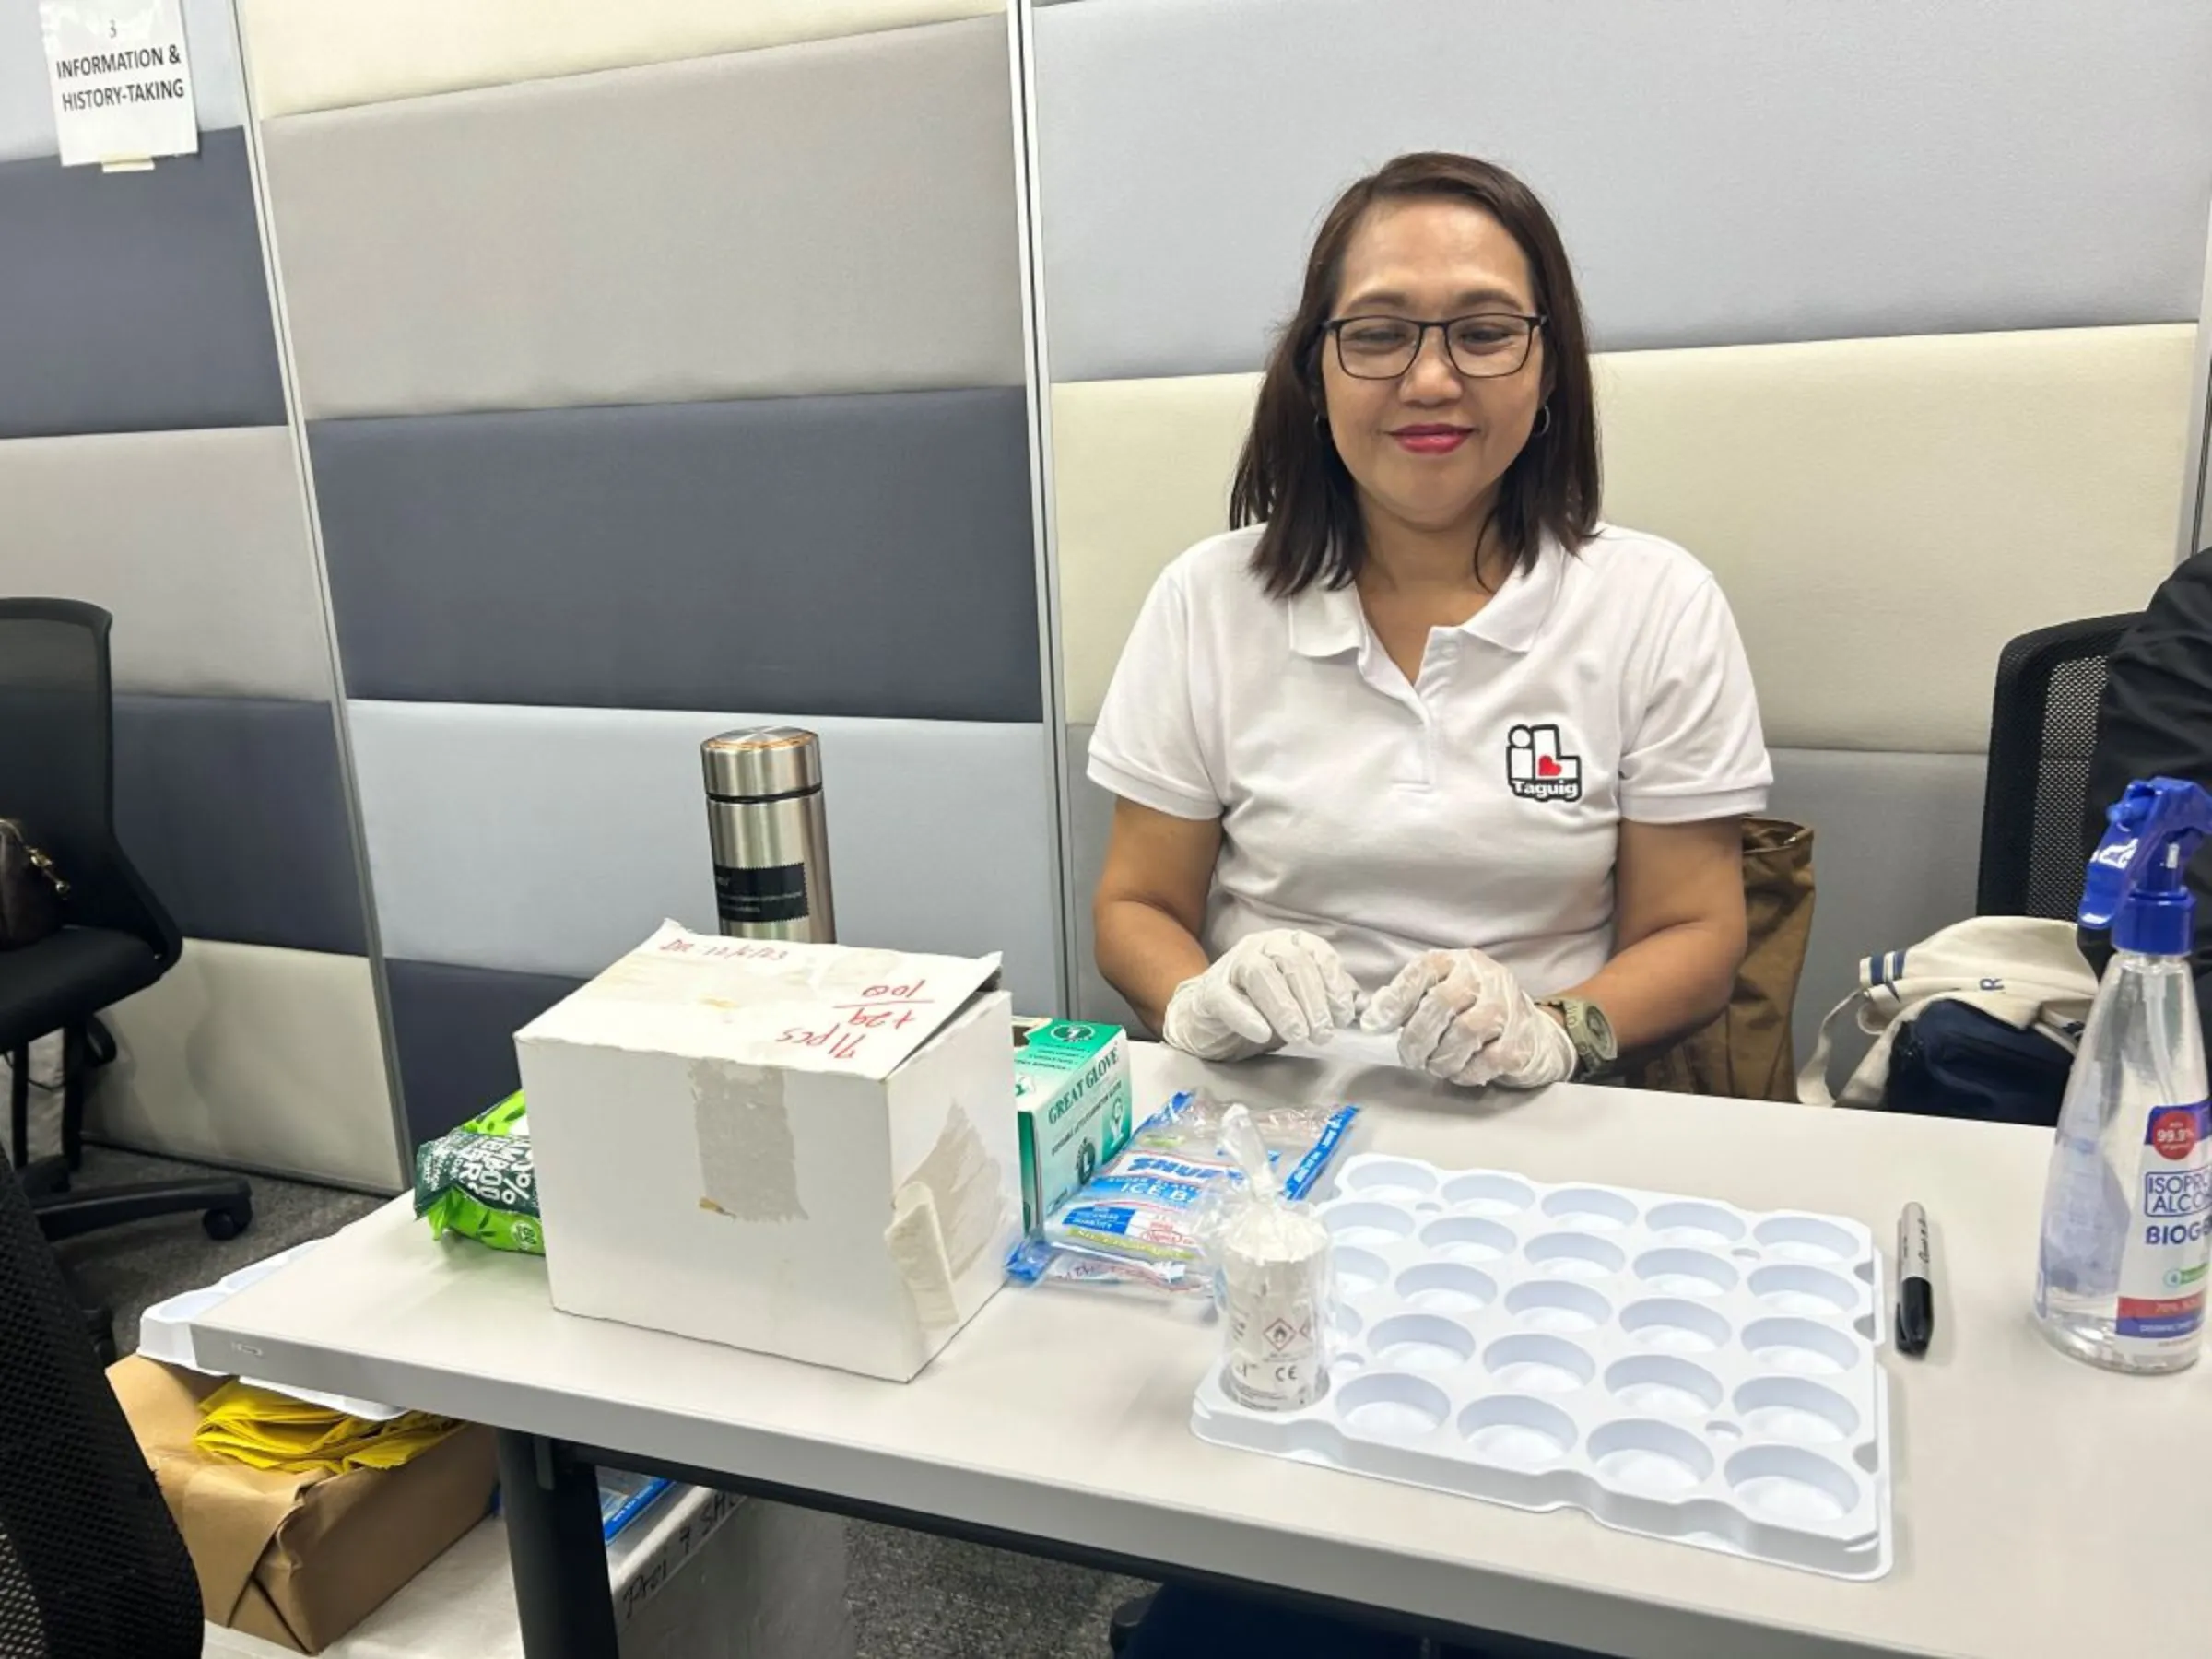 Health officers from Taguig City government assist Jhpiego and Home Credit during an HPV screening on Jan. 26. Mariejo Ramos/Thomson Reuters Foundation